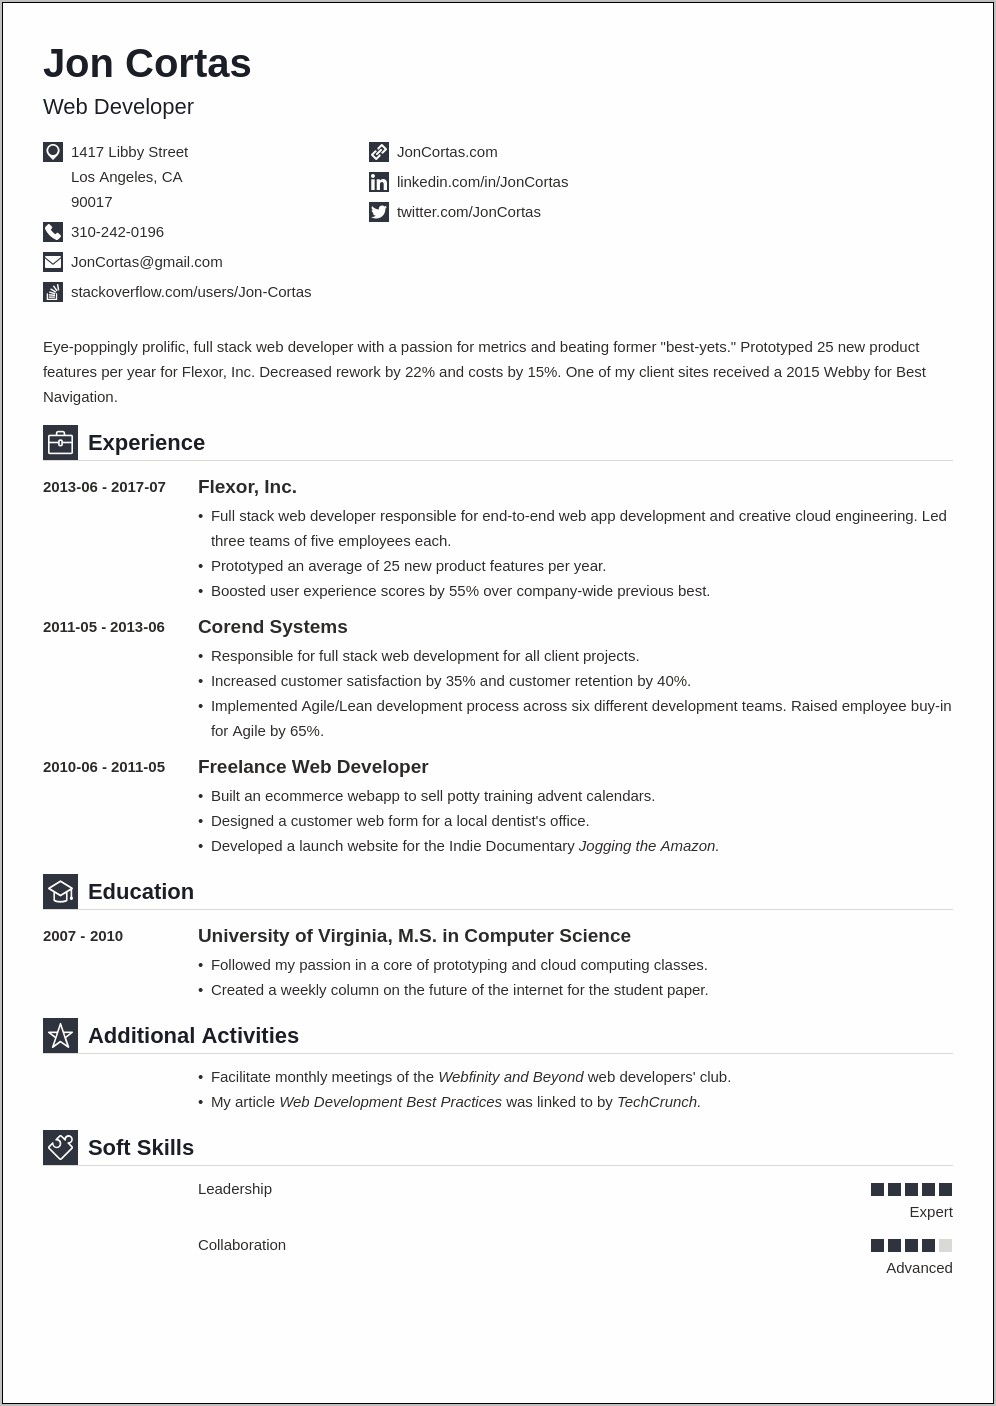 8 Year Experience Resume Format For Developer